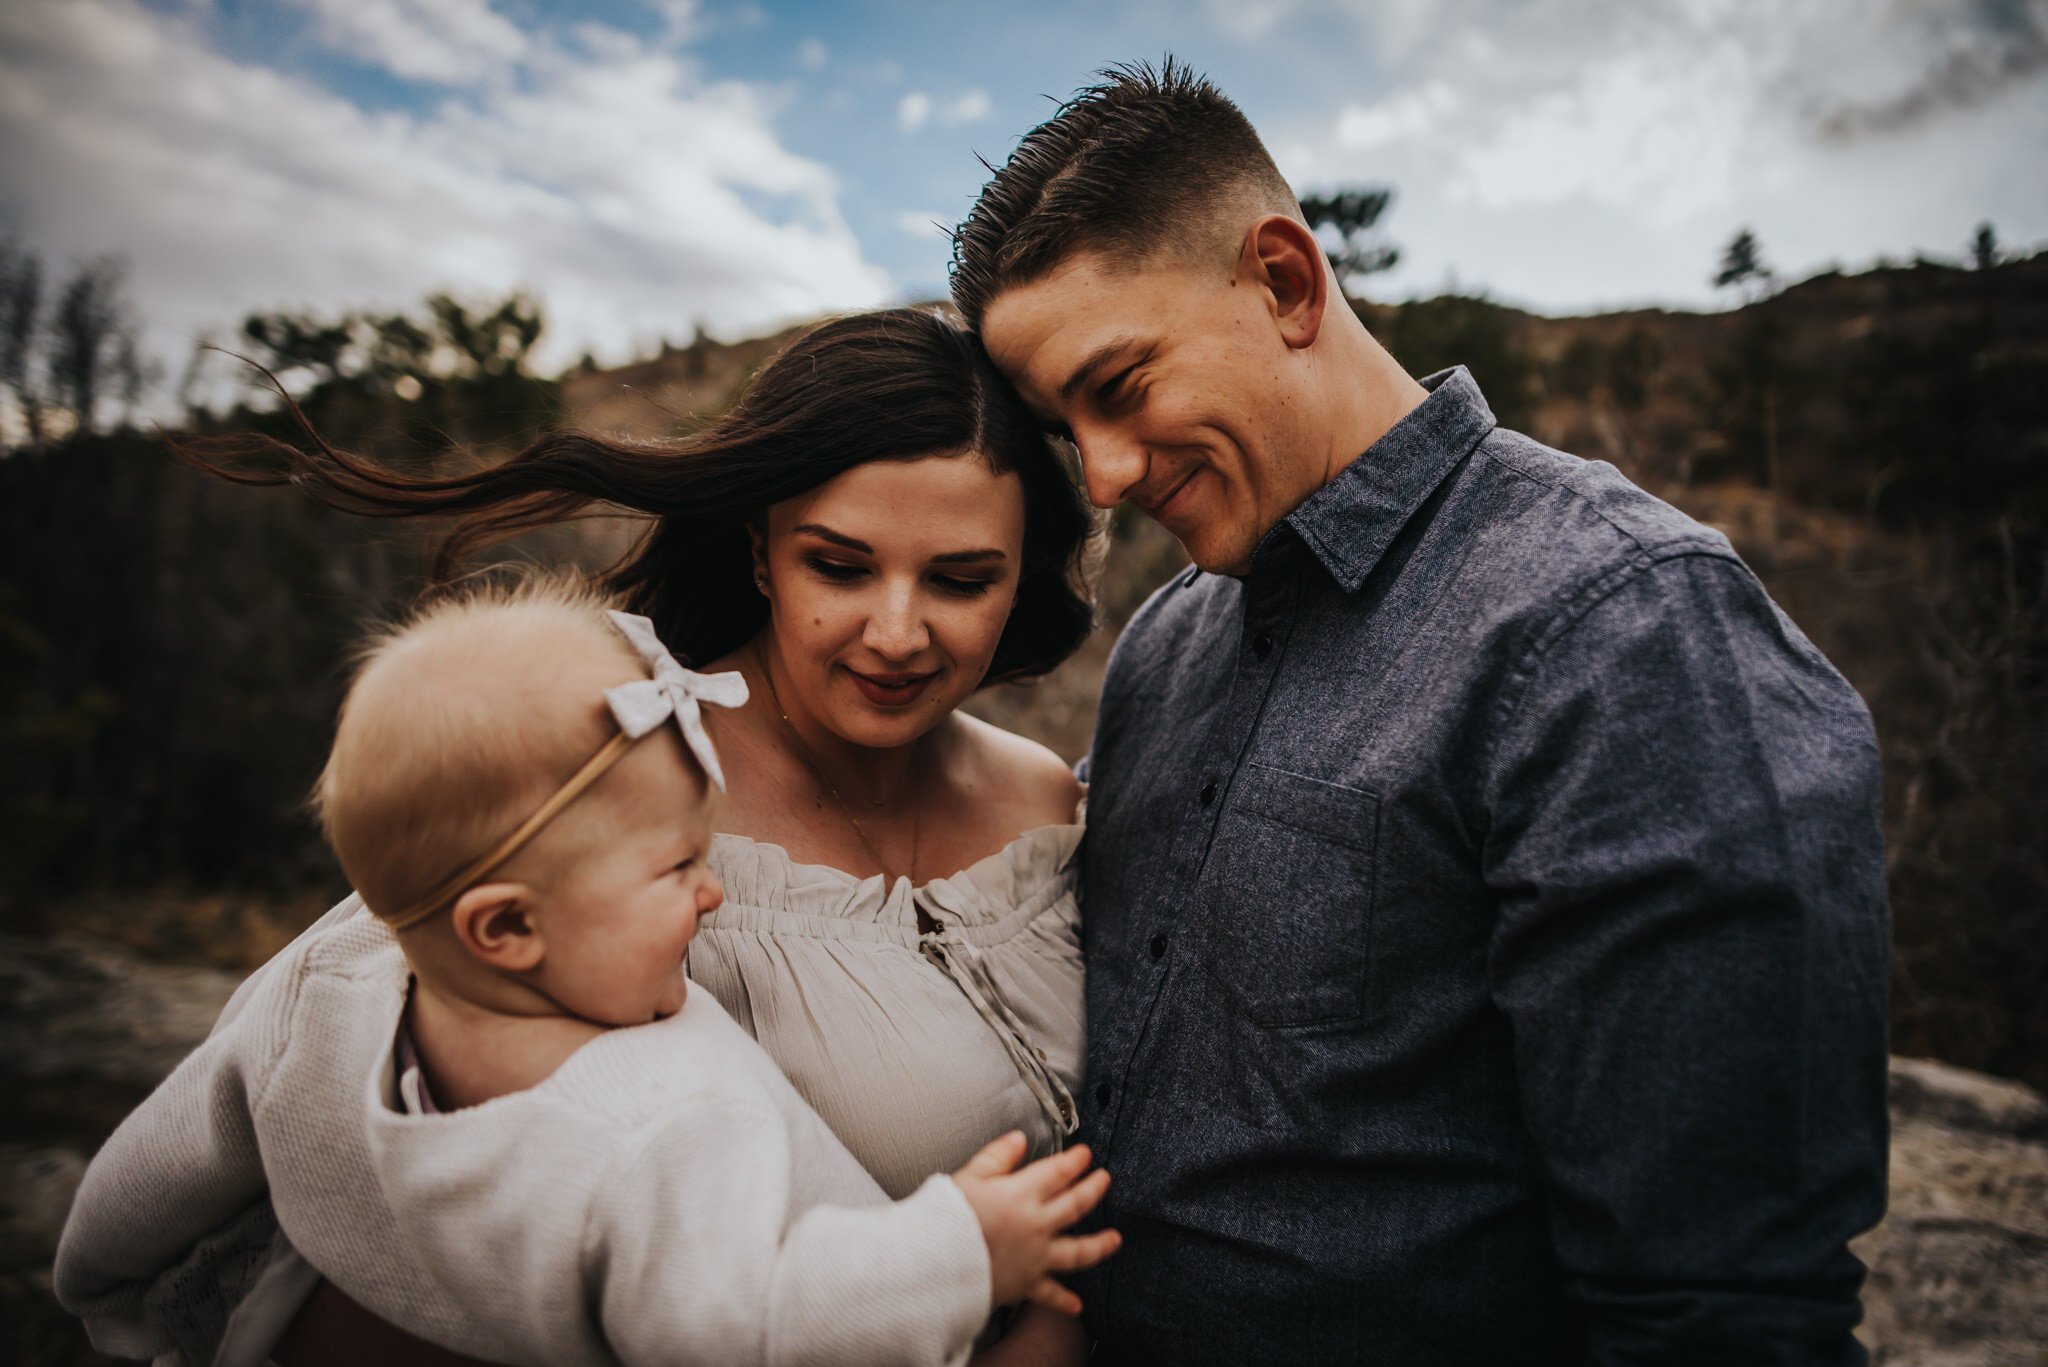 Miller+Family+Session+Mentorship+Colorado+Springs+Colorado+Sunset+Ute+Valley+Park+Mountains+Fields+Mom+Dad+Son+Daughter+Baby+Wild+Prairie+Photography-22-2020.jpeg